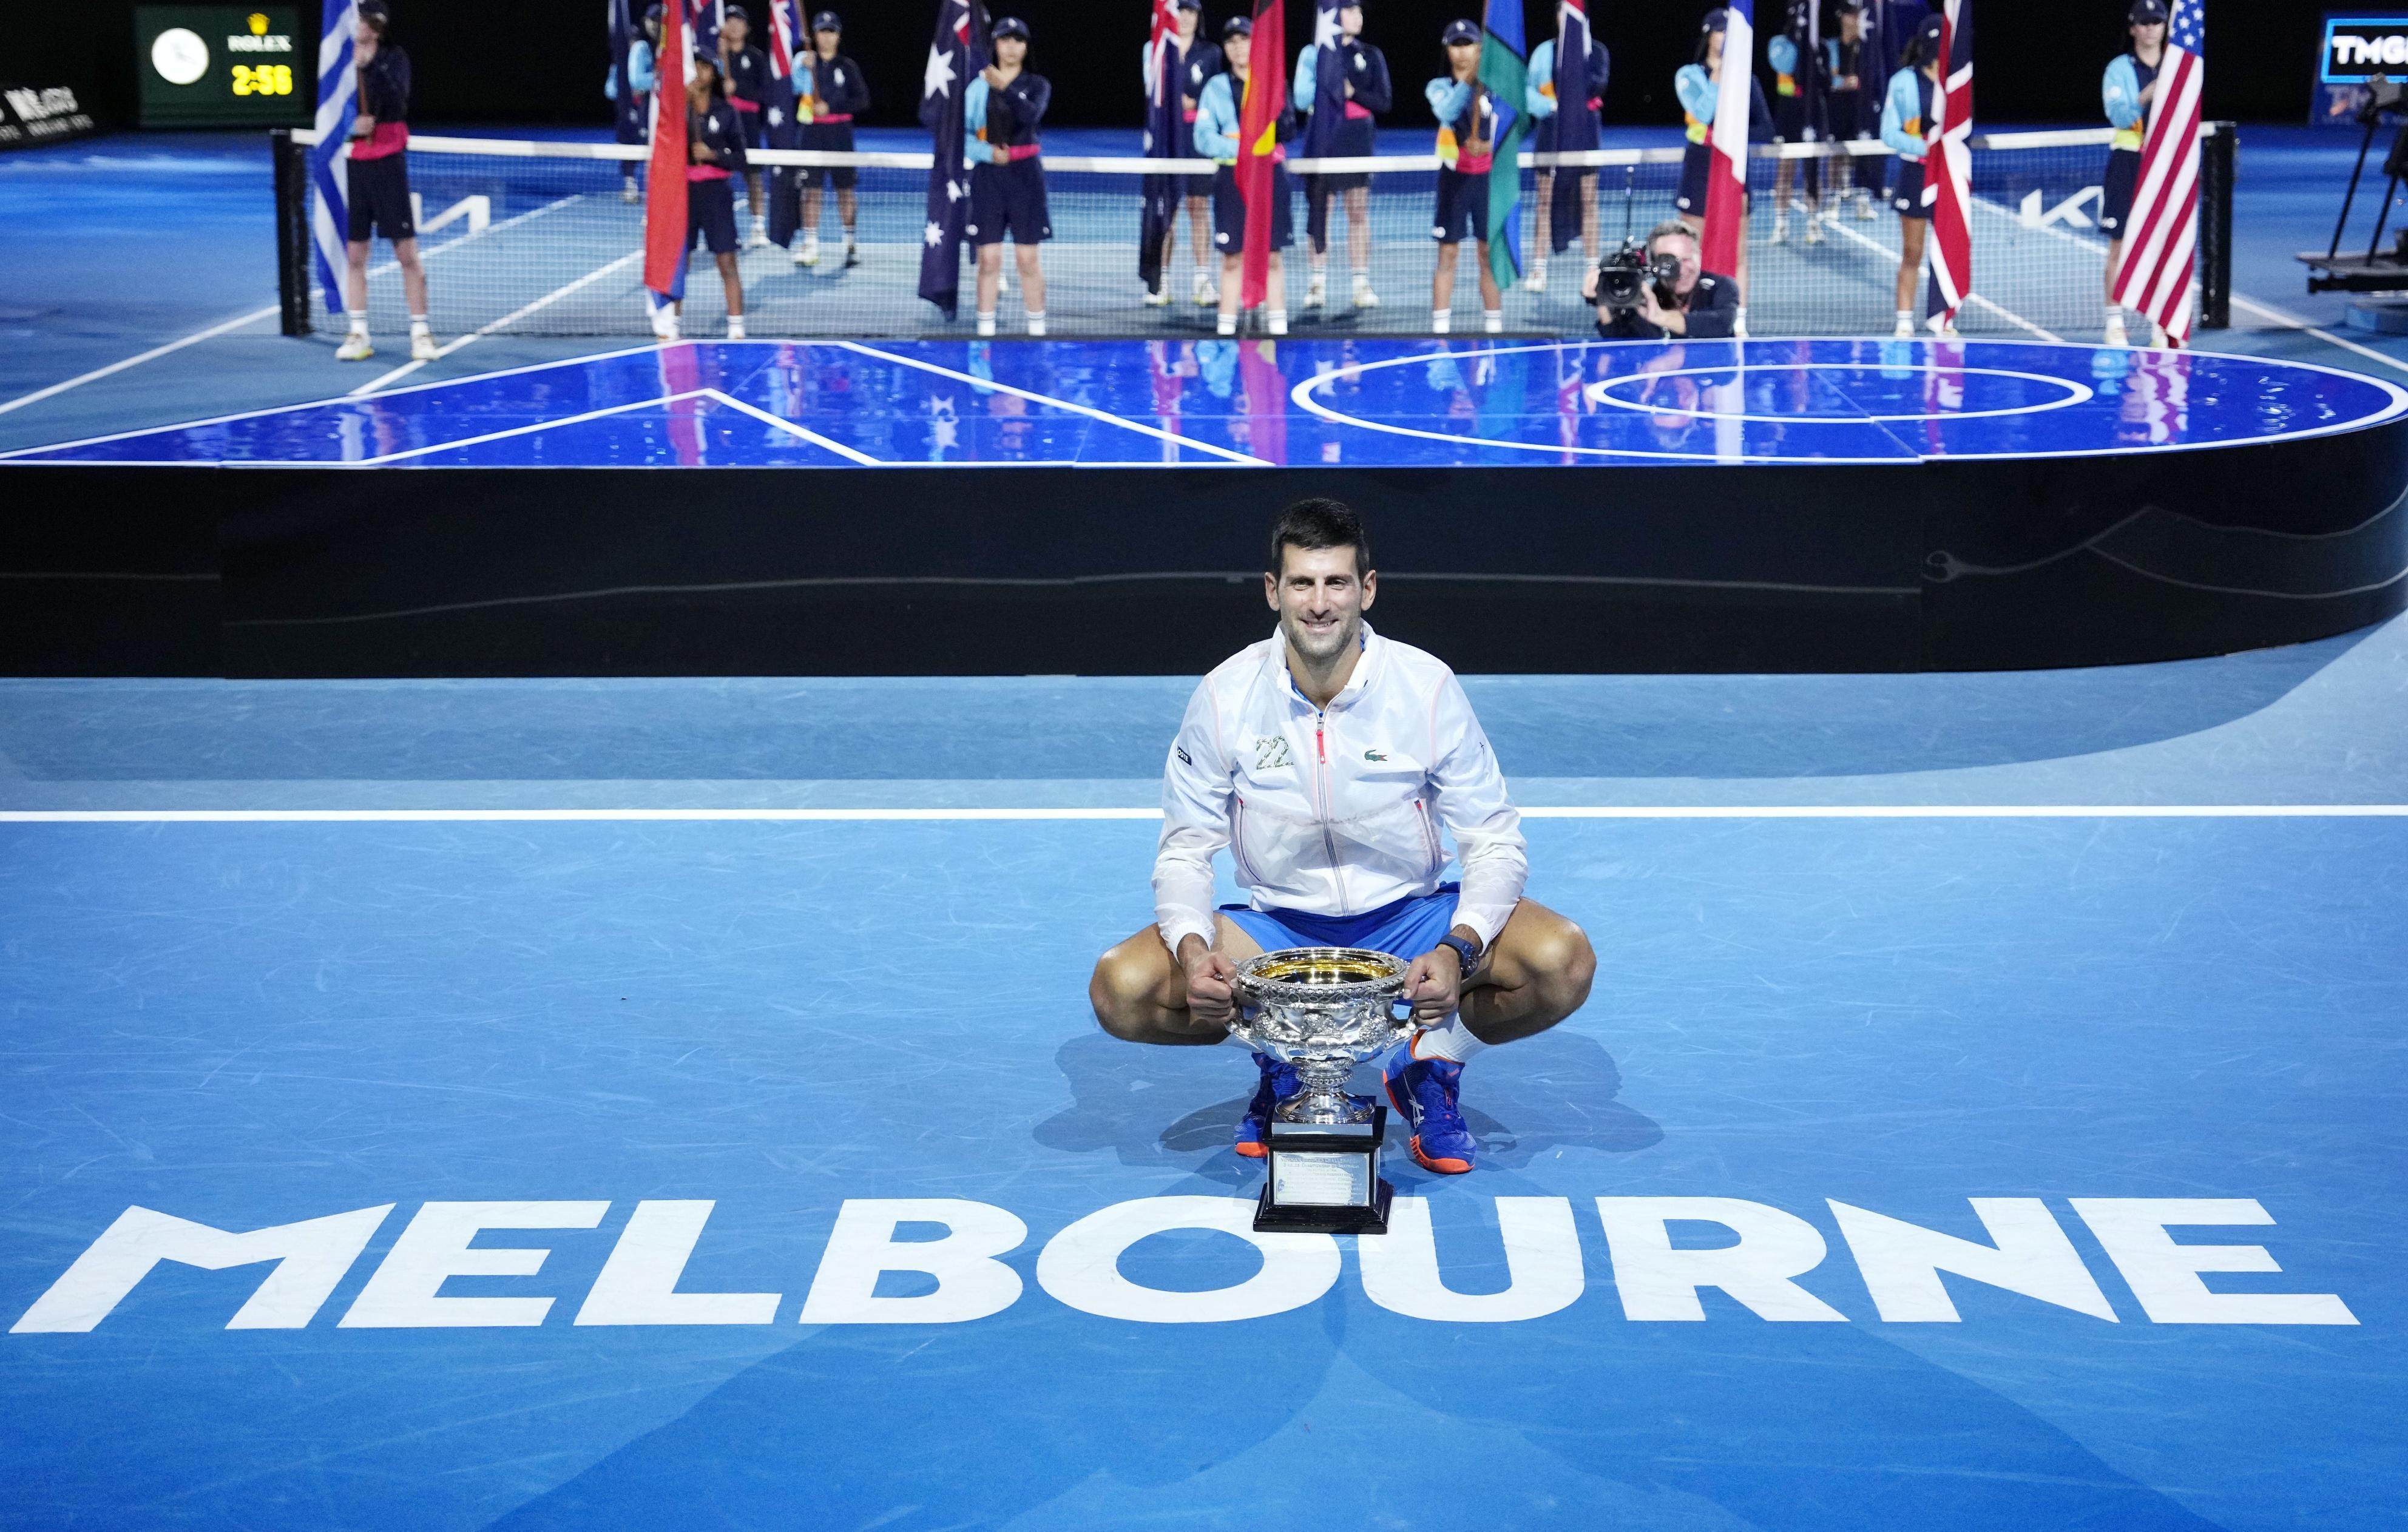 Novak Djokovic poses for pictures after claiming his 10th title at the Australian Open. Photo: Kyodo